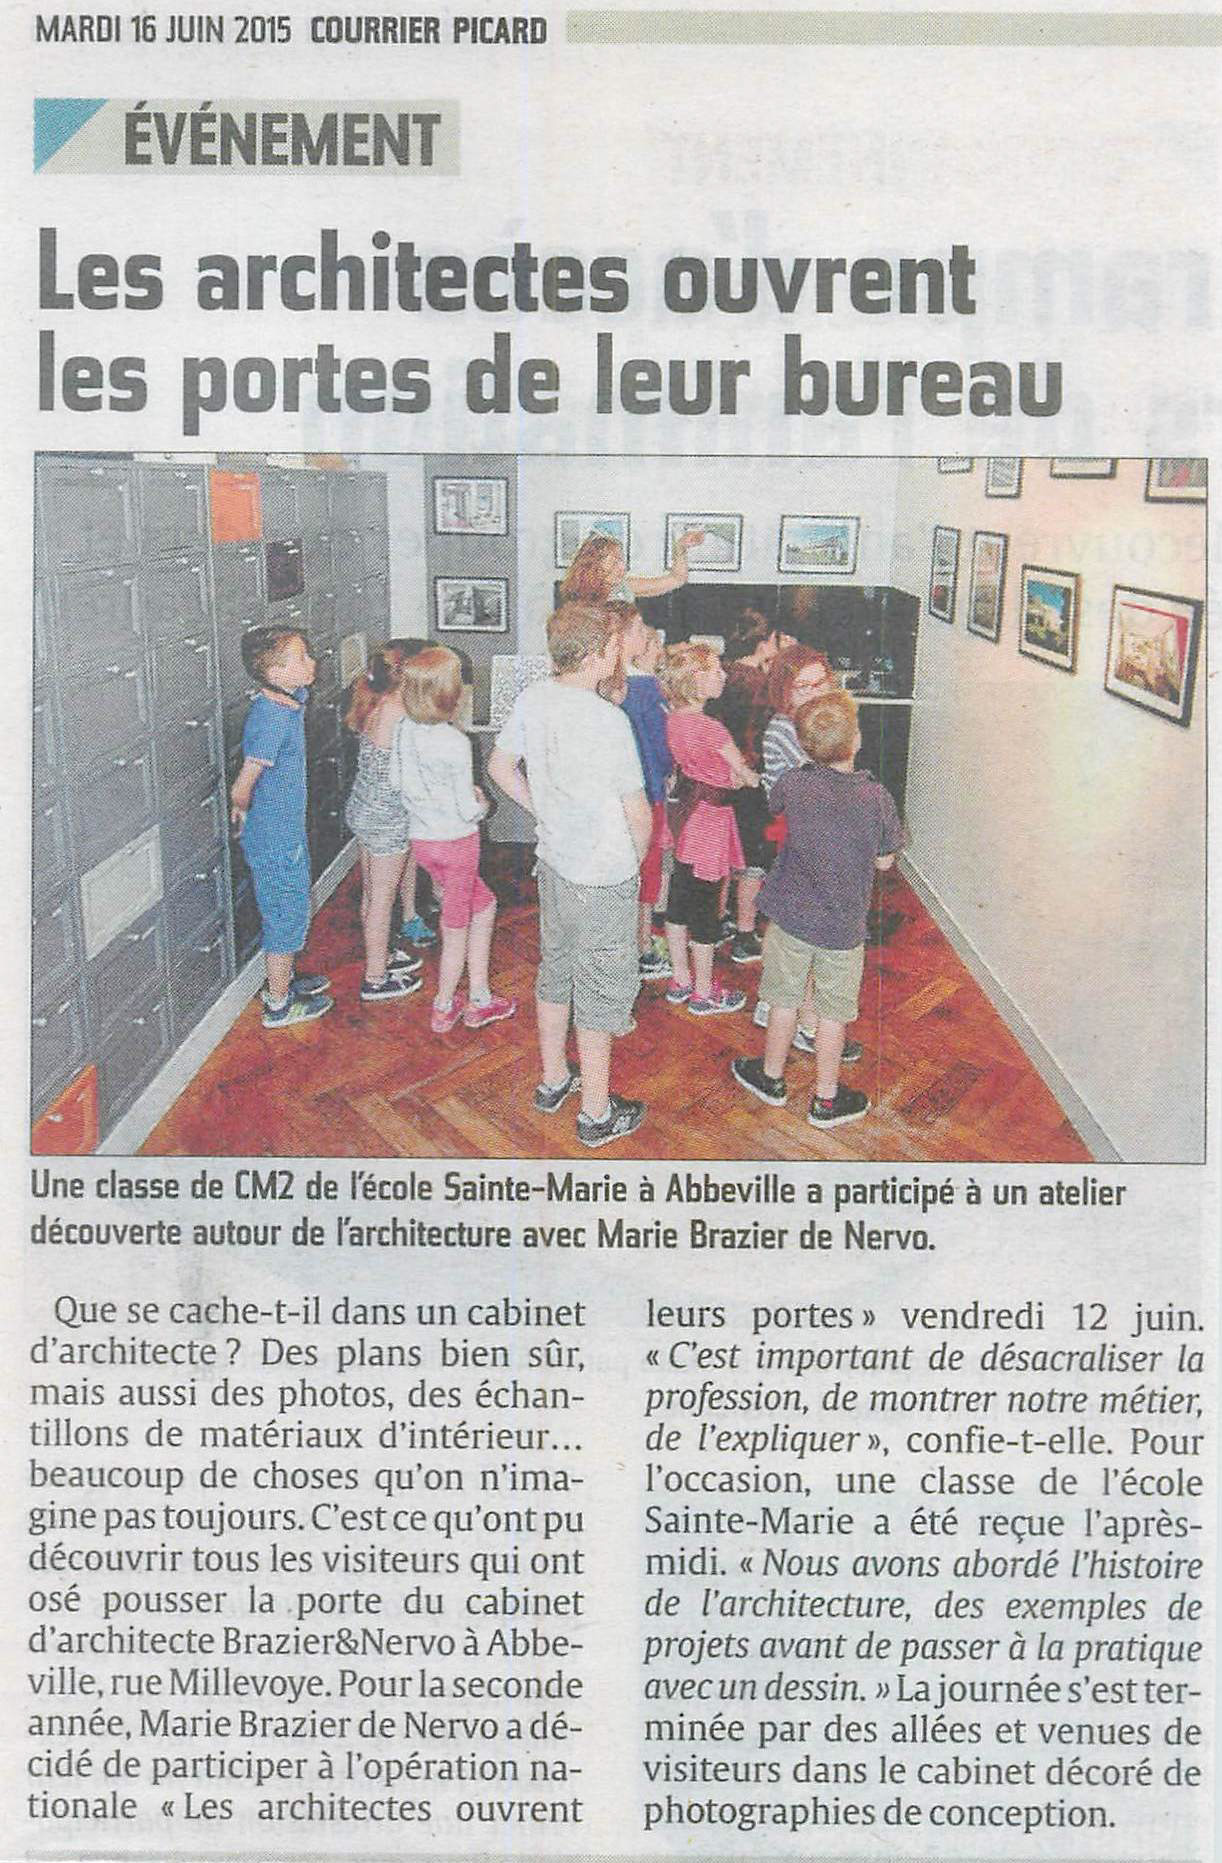 15-06-16-JPO-Articles-courrier-picard-2